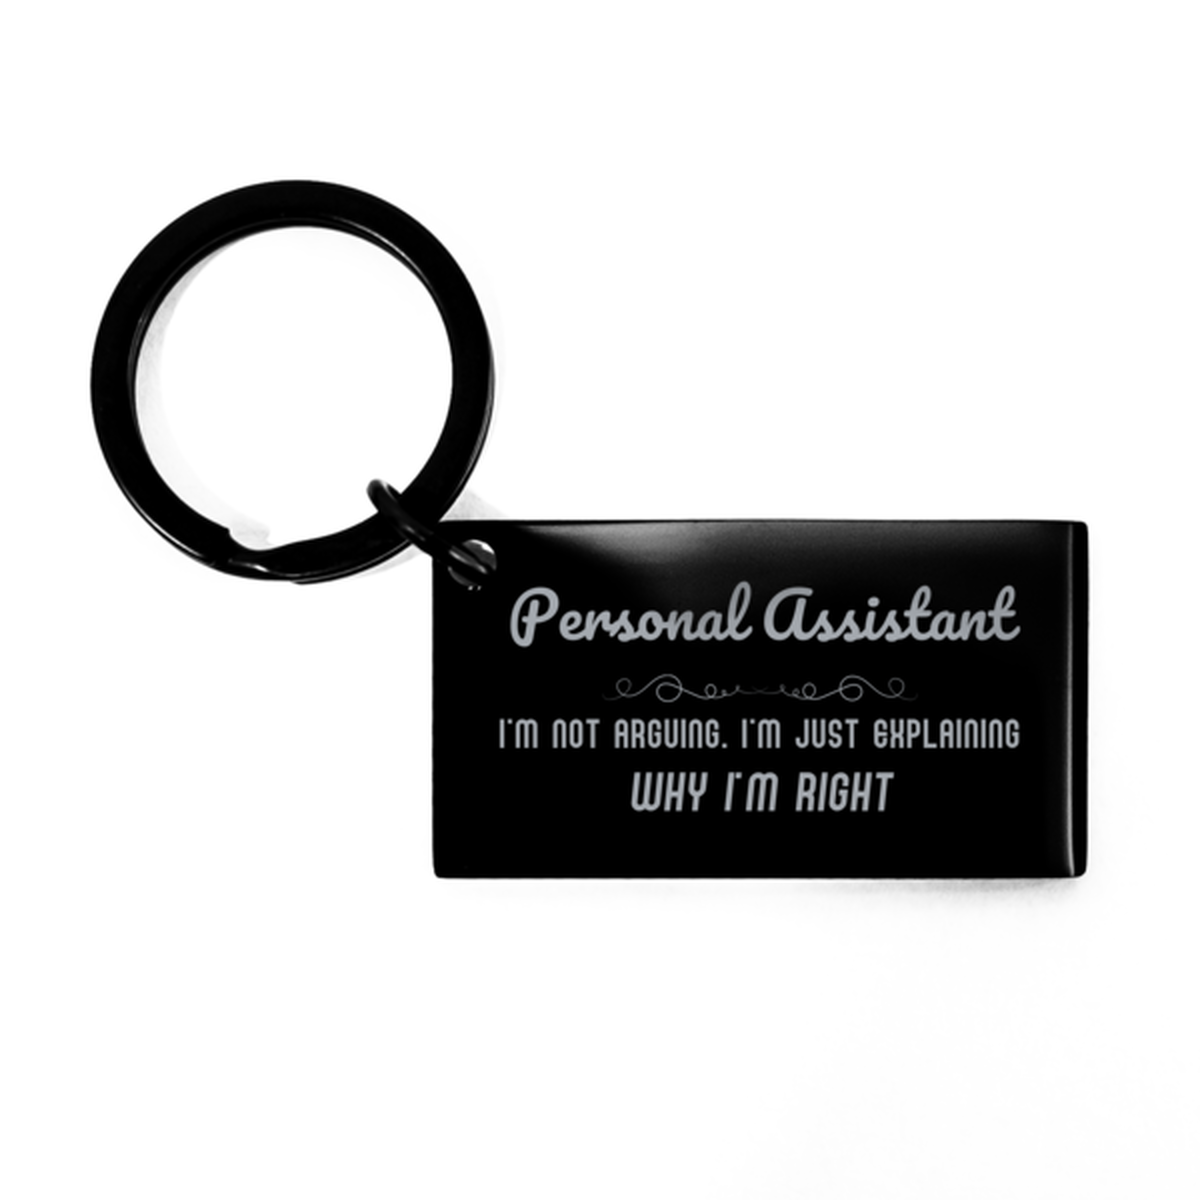 Personal Assistant I'm not Arguing. I'm Just Explaining Why I'm RIGHT Keychain, Funny Saying Quote Personal Assistant Gifts For Personal Assistant Graduation Birthday Christmas Gifts for Men Women Coworker